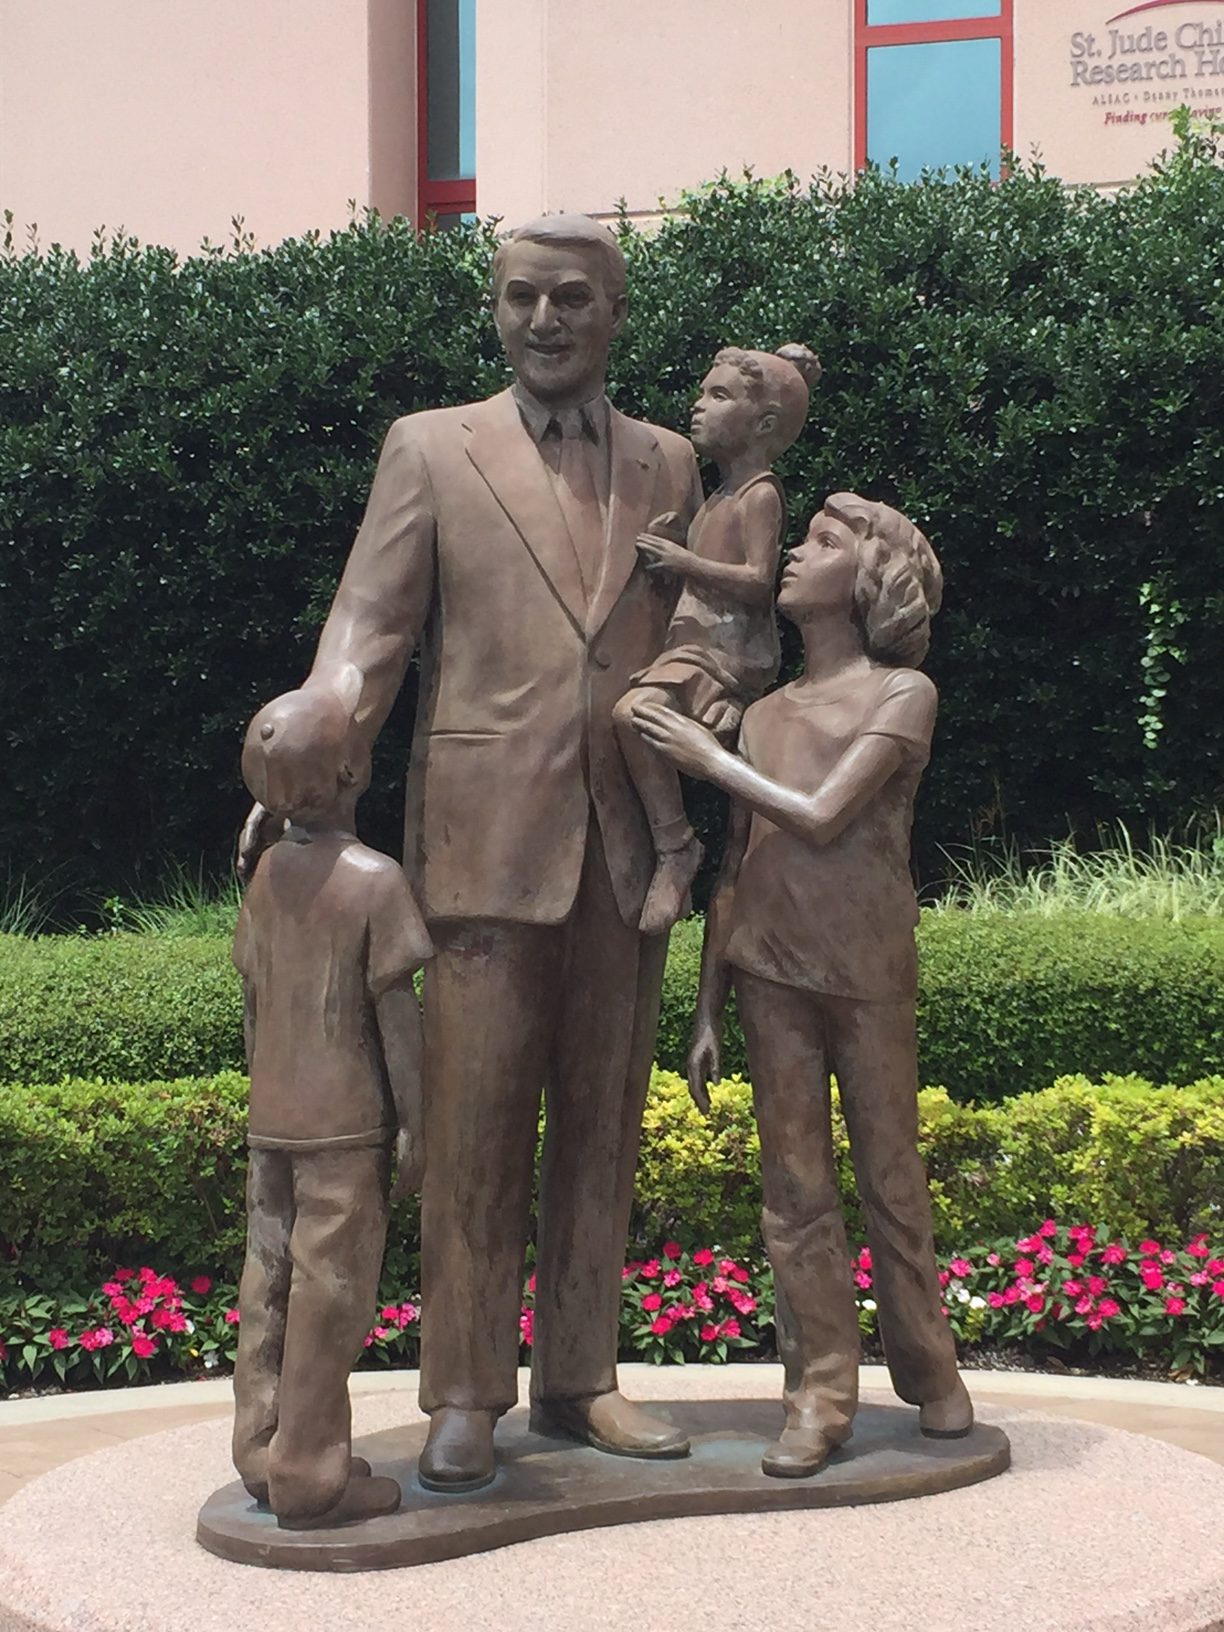 Statue of Danny Thomas at St Jude Children's Research Hospital